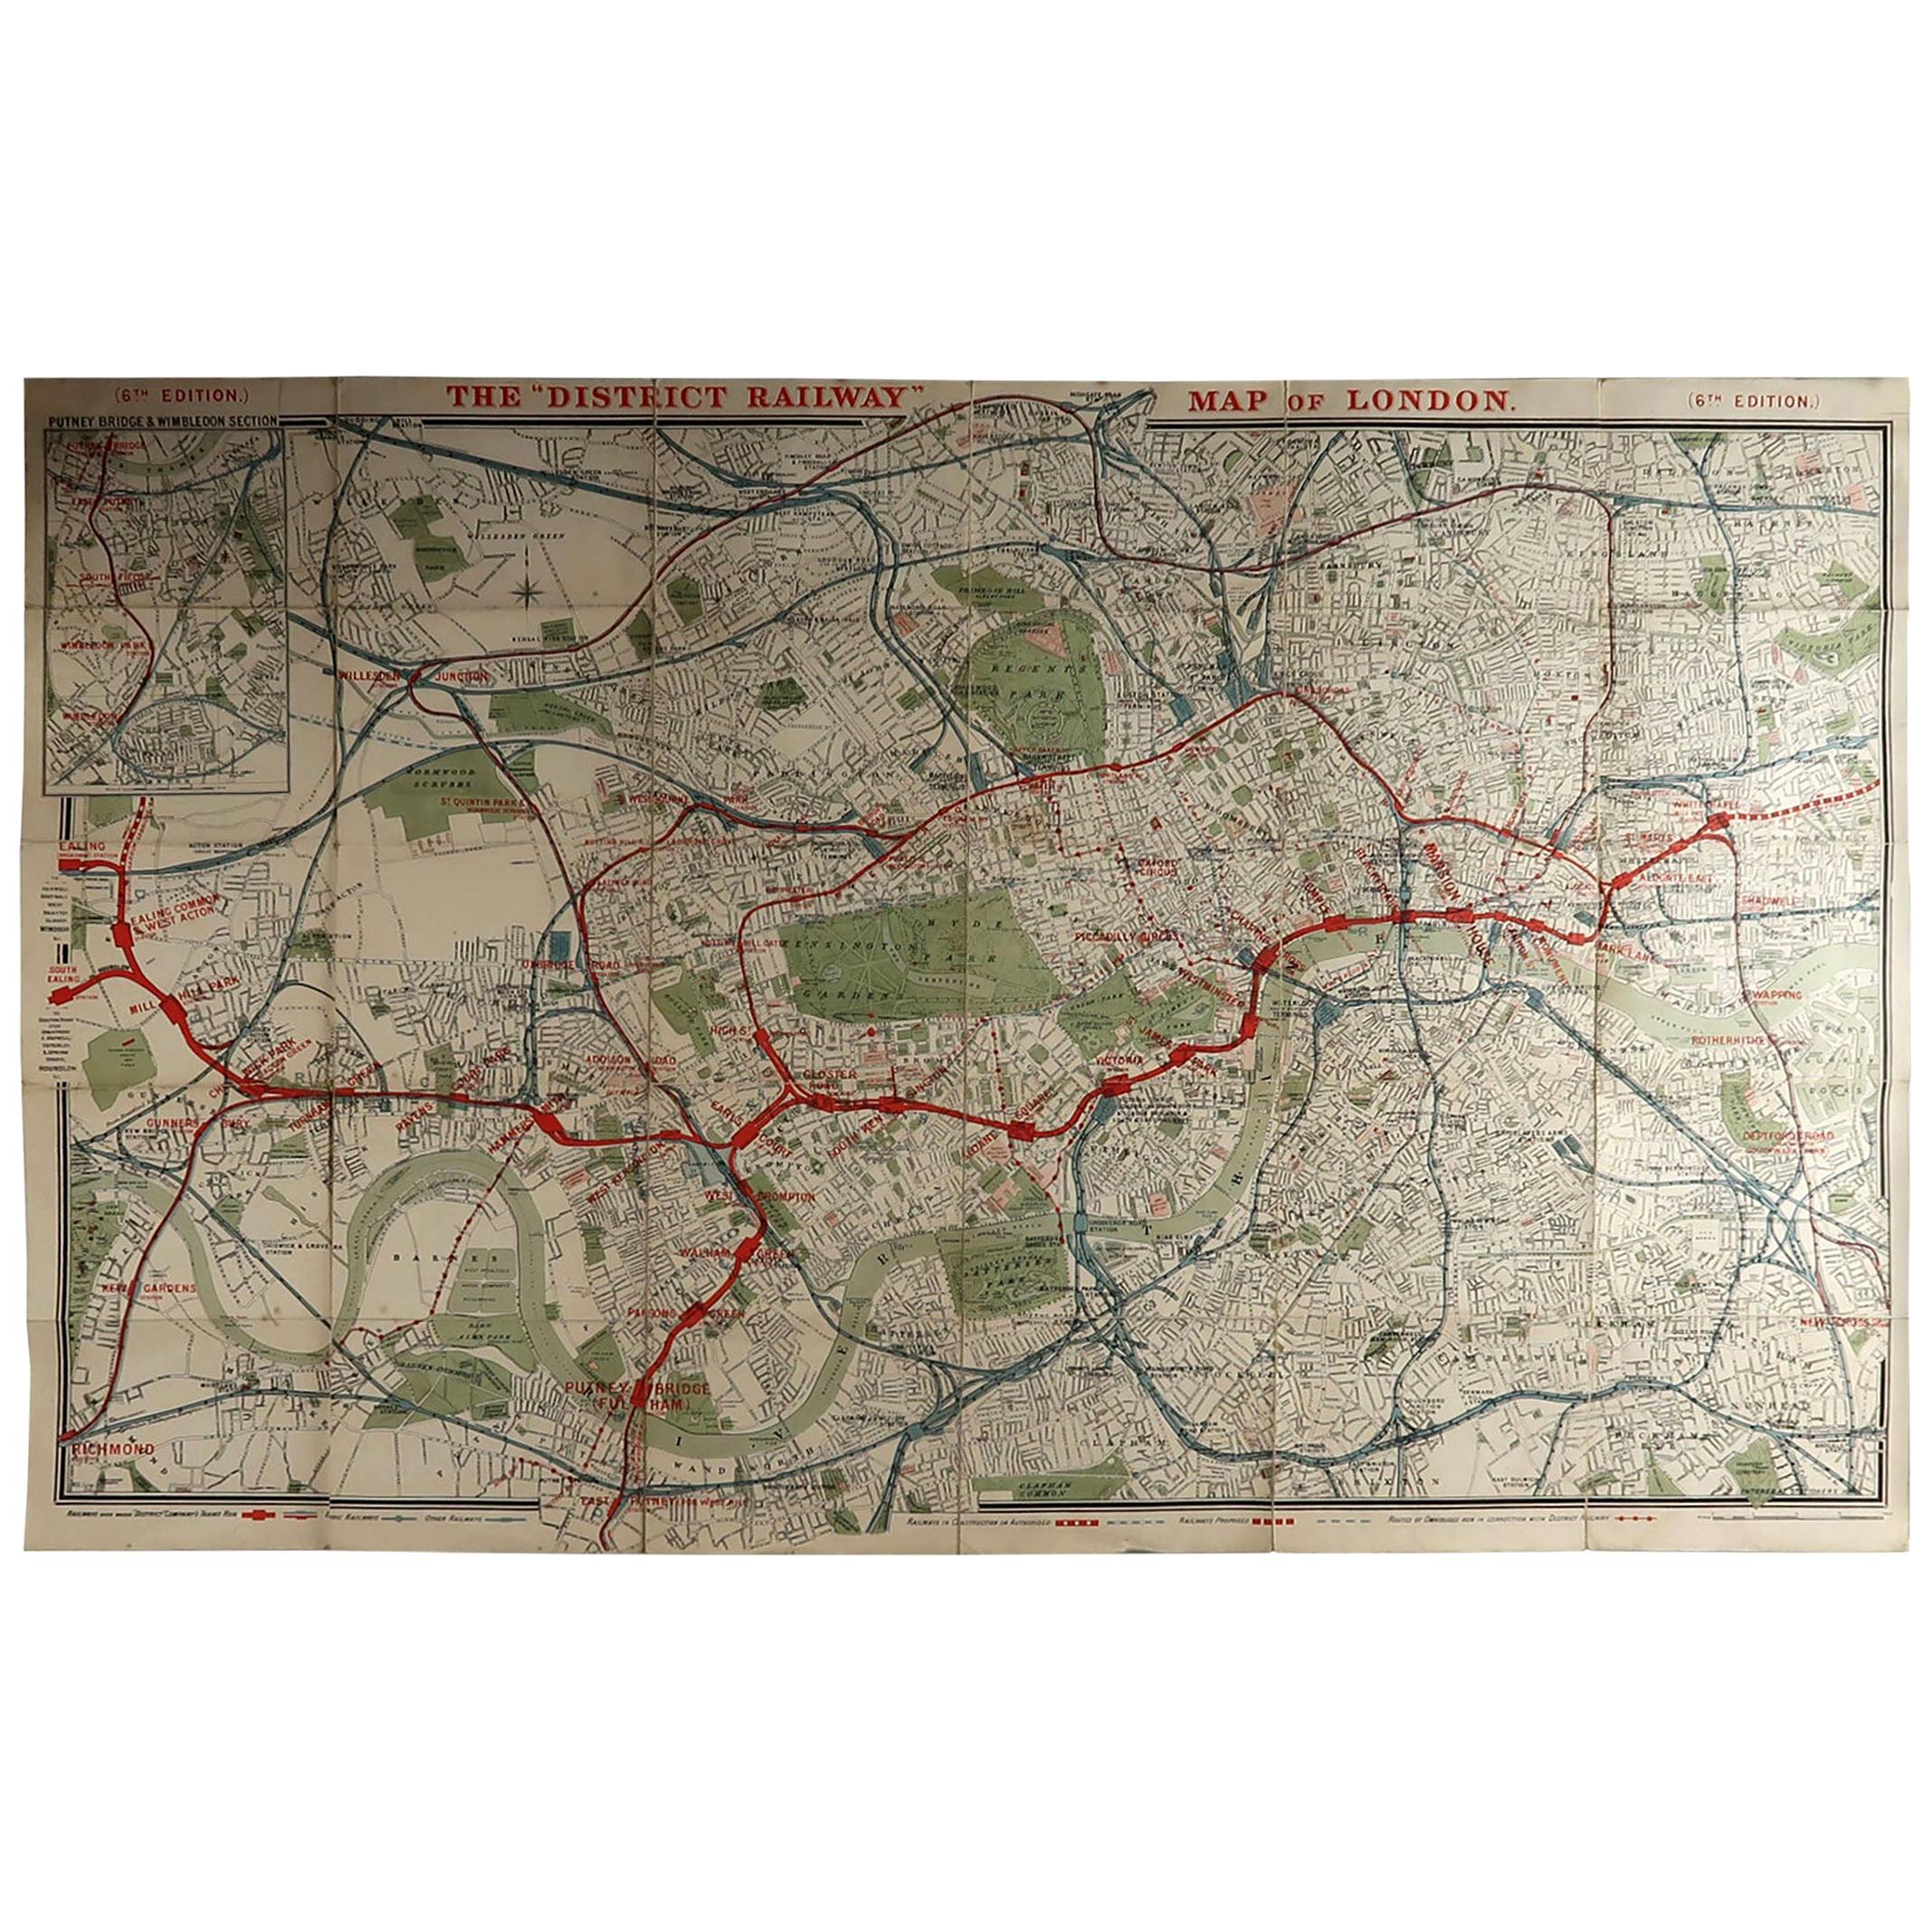 Superb map of London

It is the District Railway map of London, 6th edition

Folding map. Printed on paper laid on to the original cloth

Published, 1898

Unframed.




 